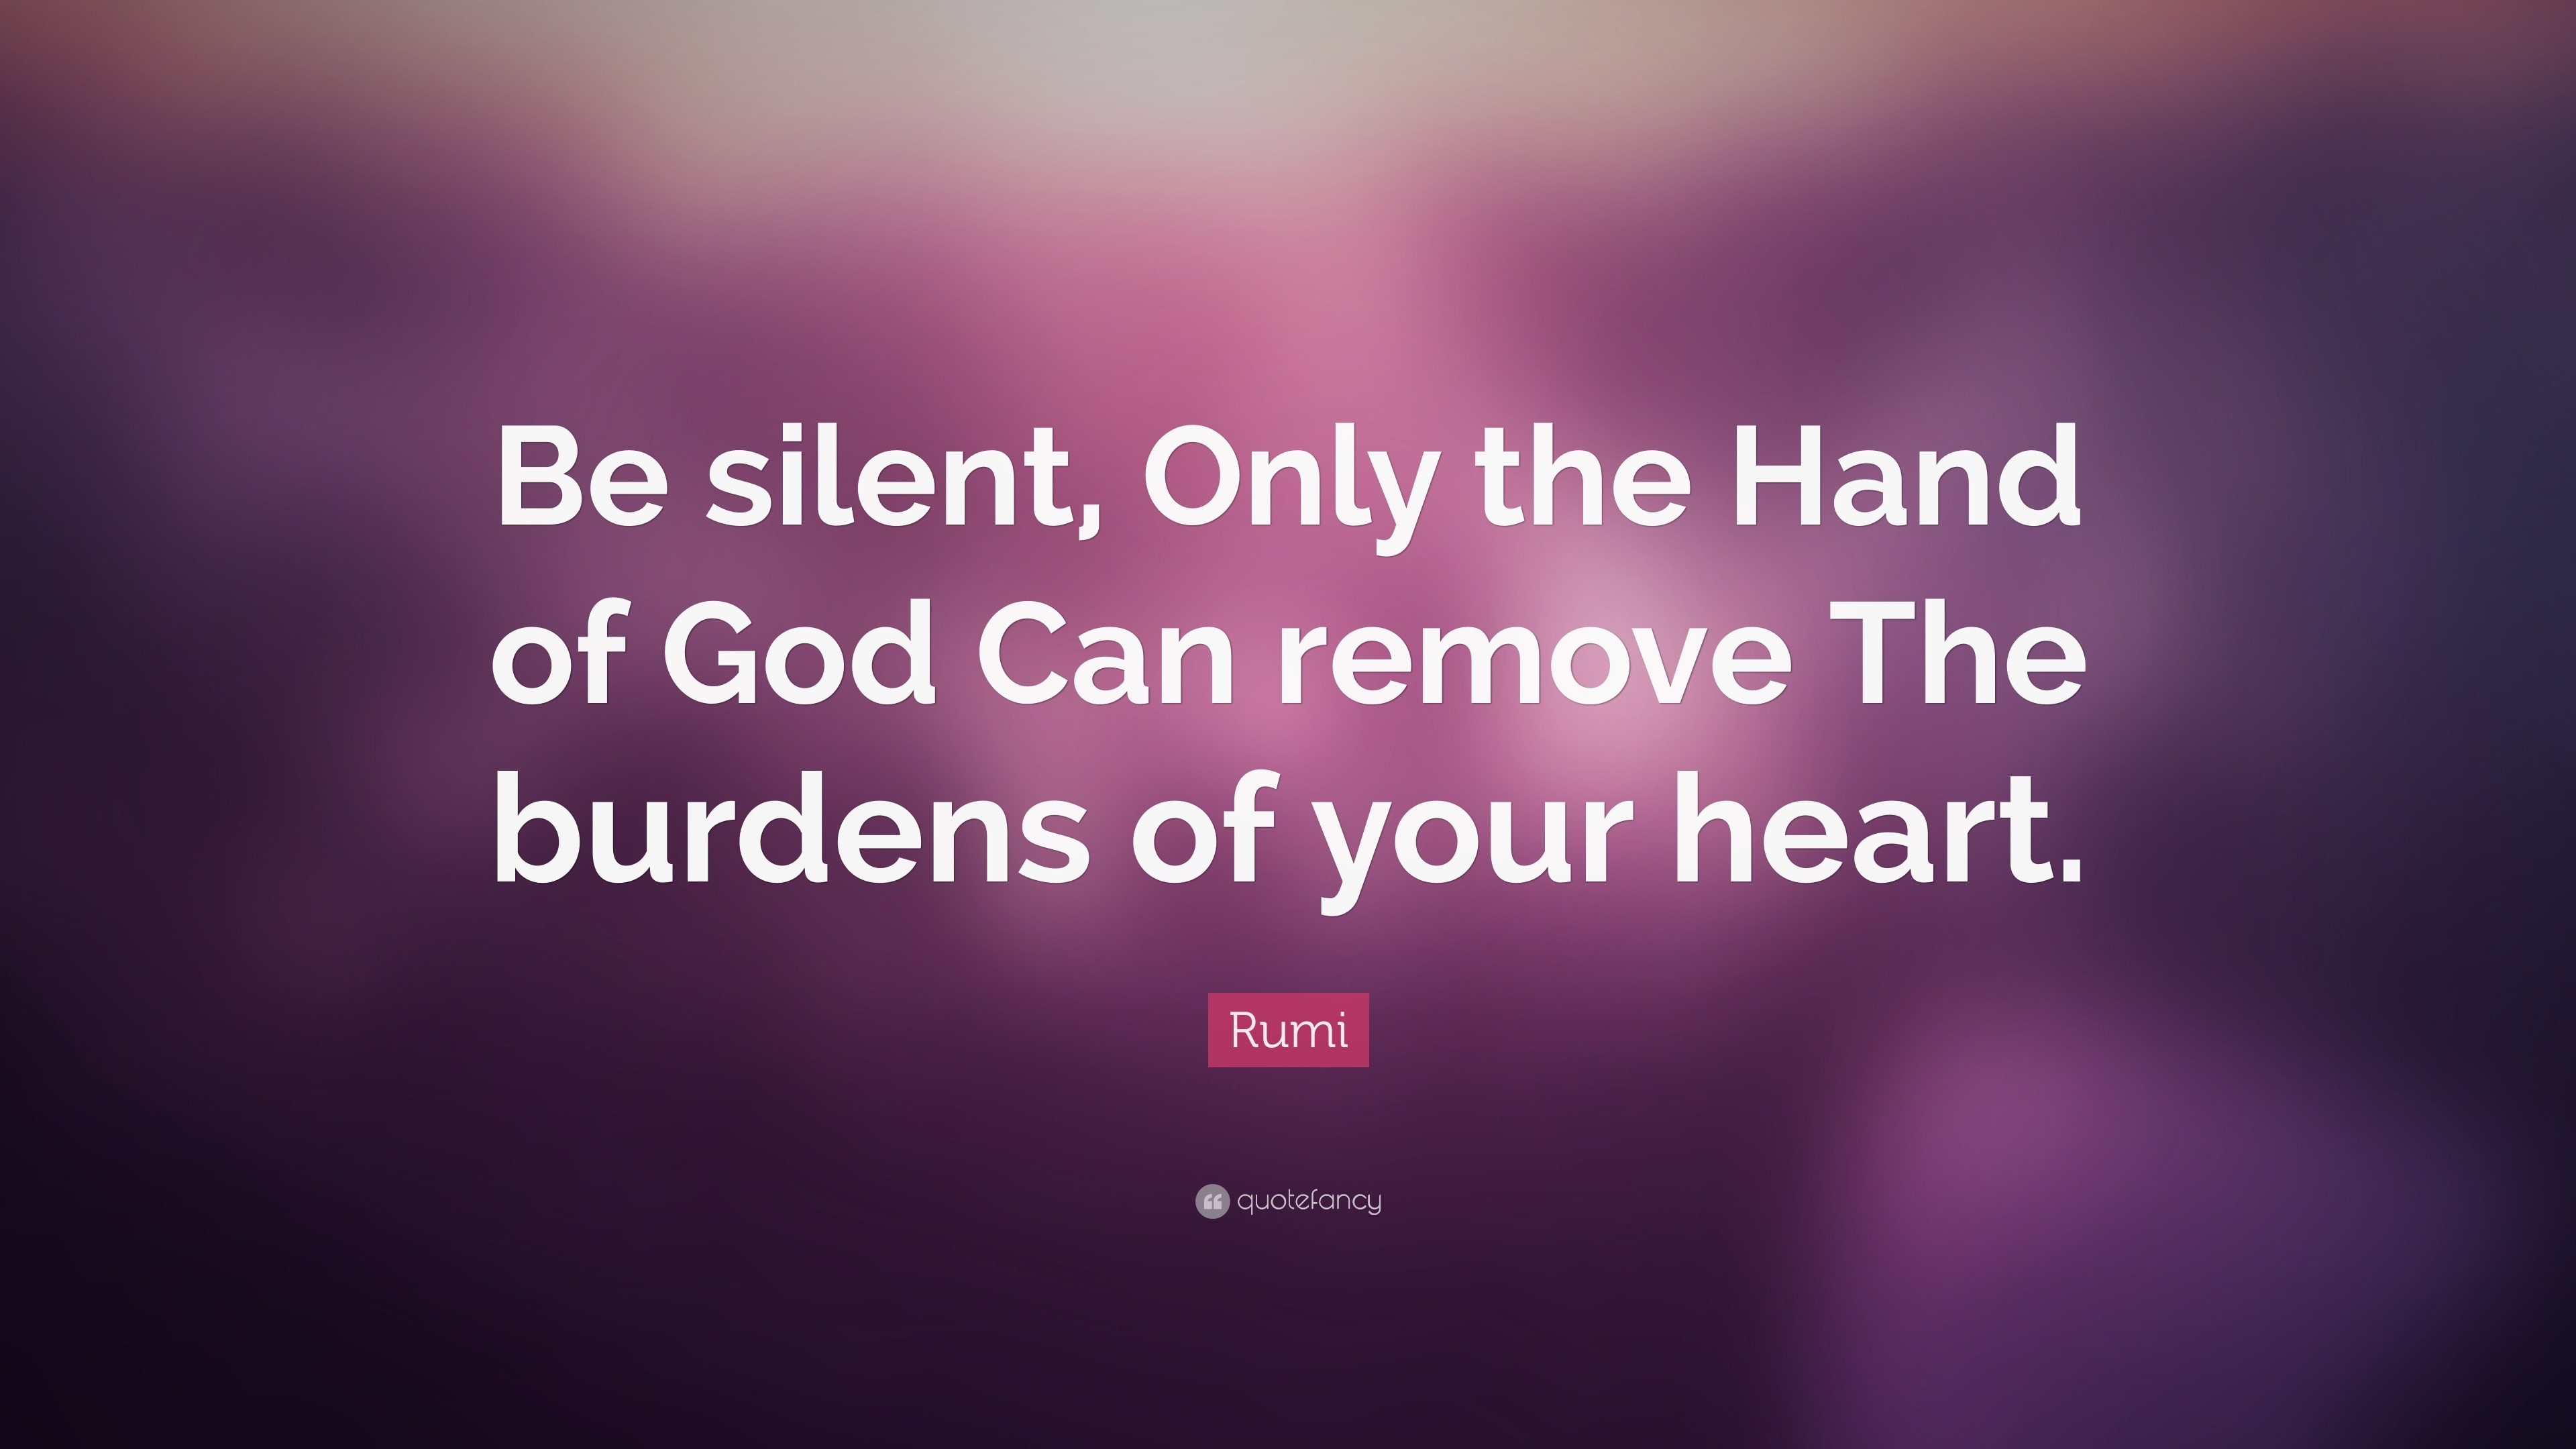 Rumi Quote: "Be silent, Only the Hand of God Can remove ...